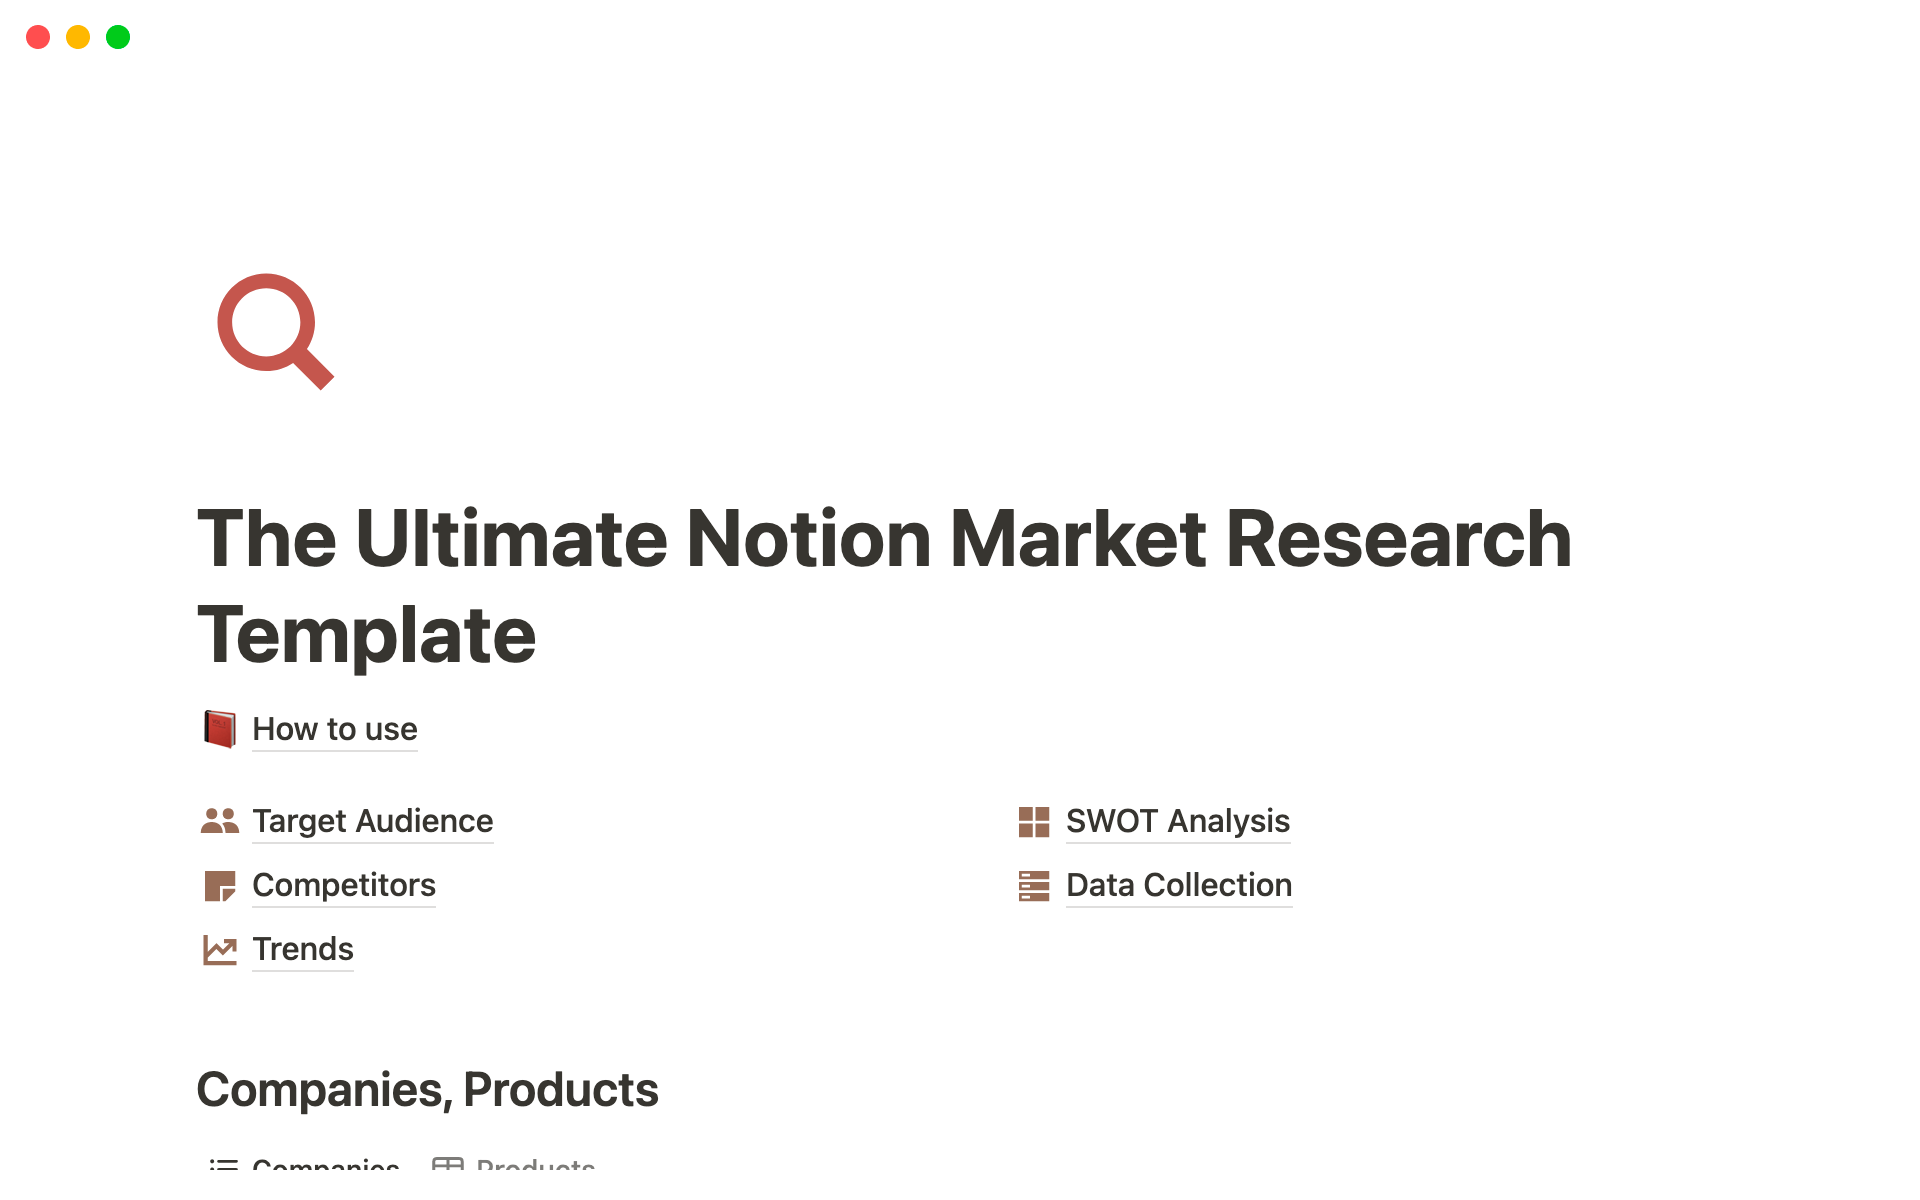 The Ultimate Notion Market Research Templateのテンプレートのプレビュー